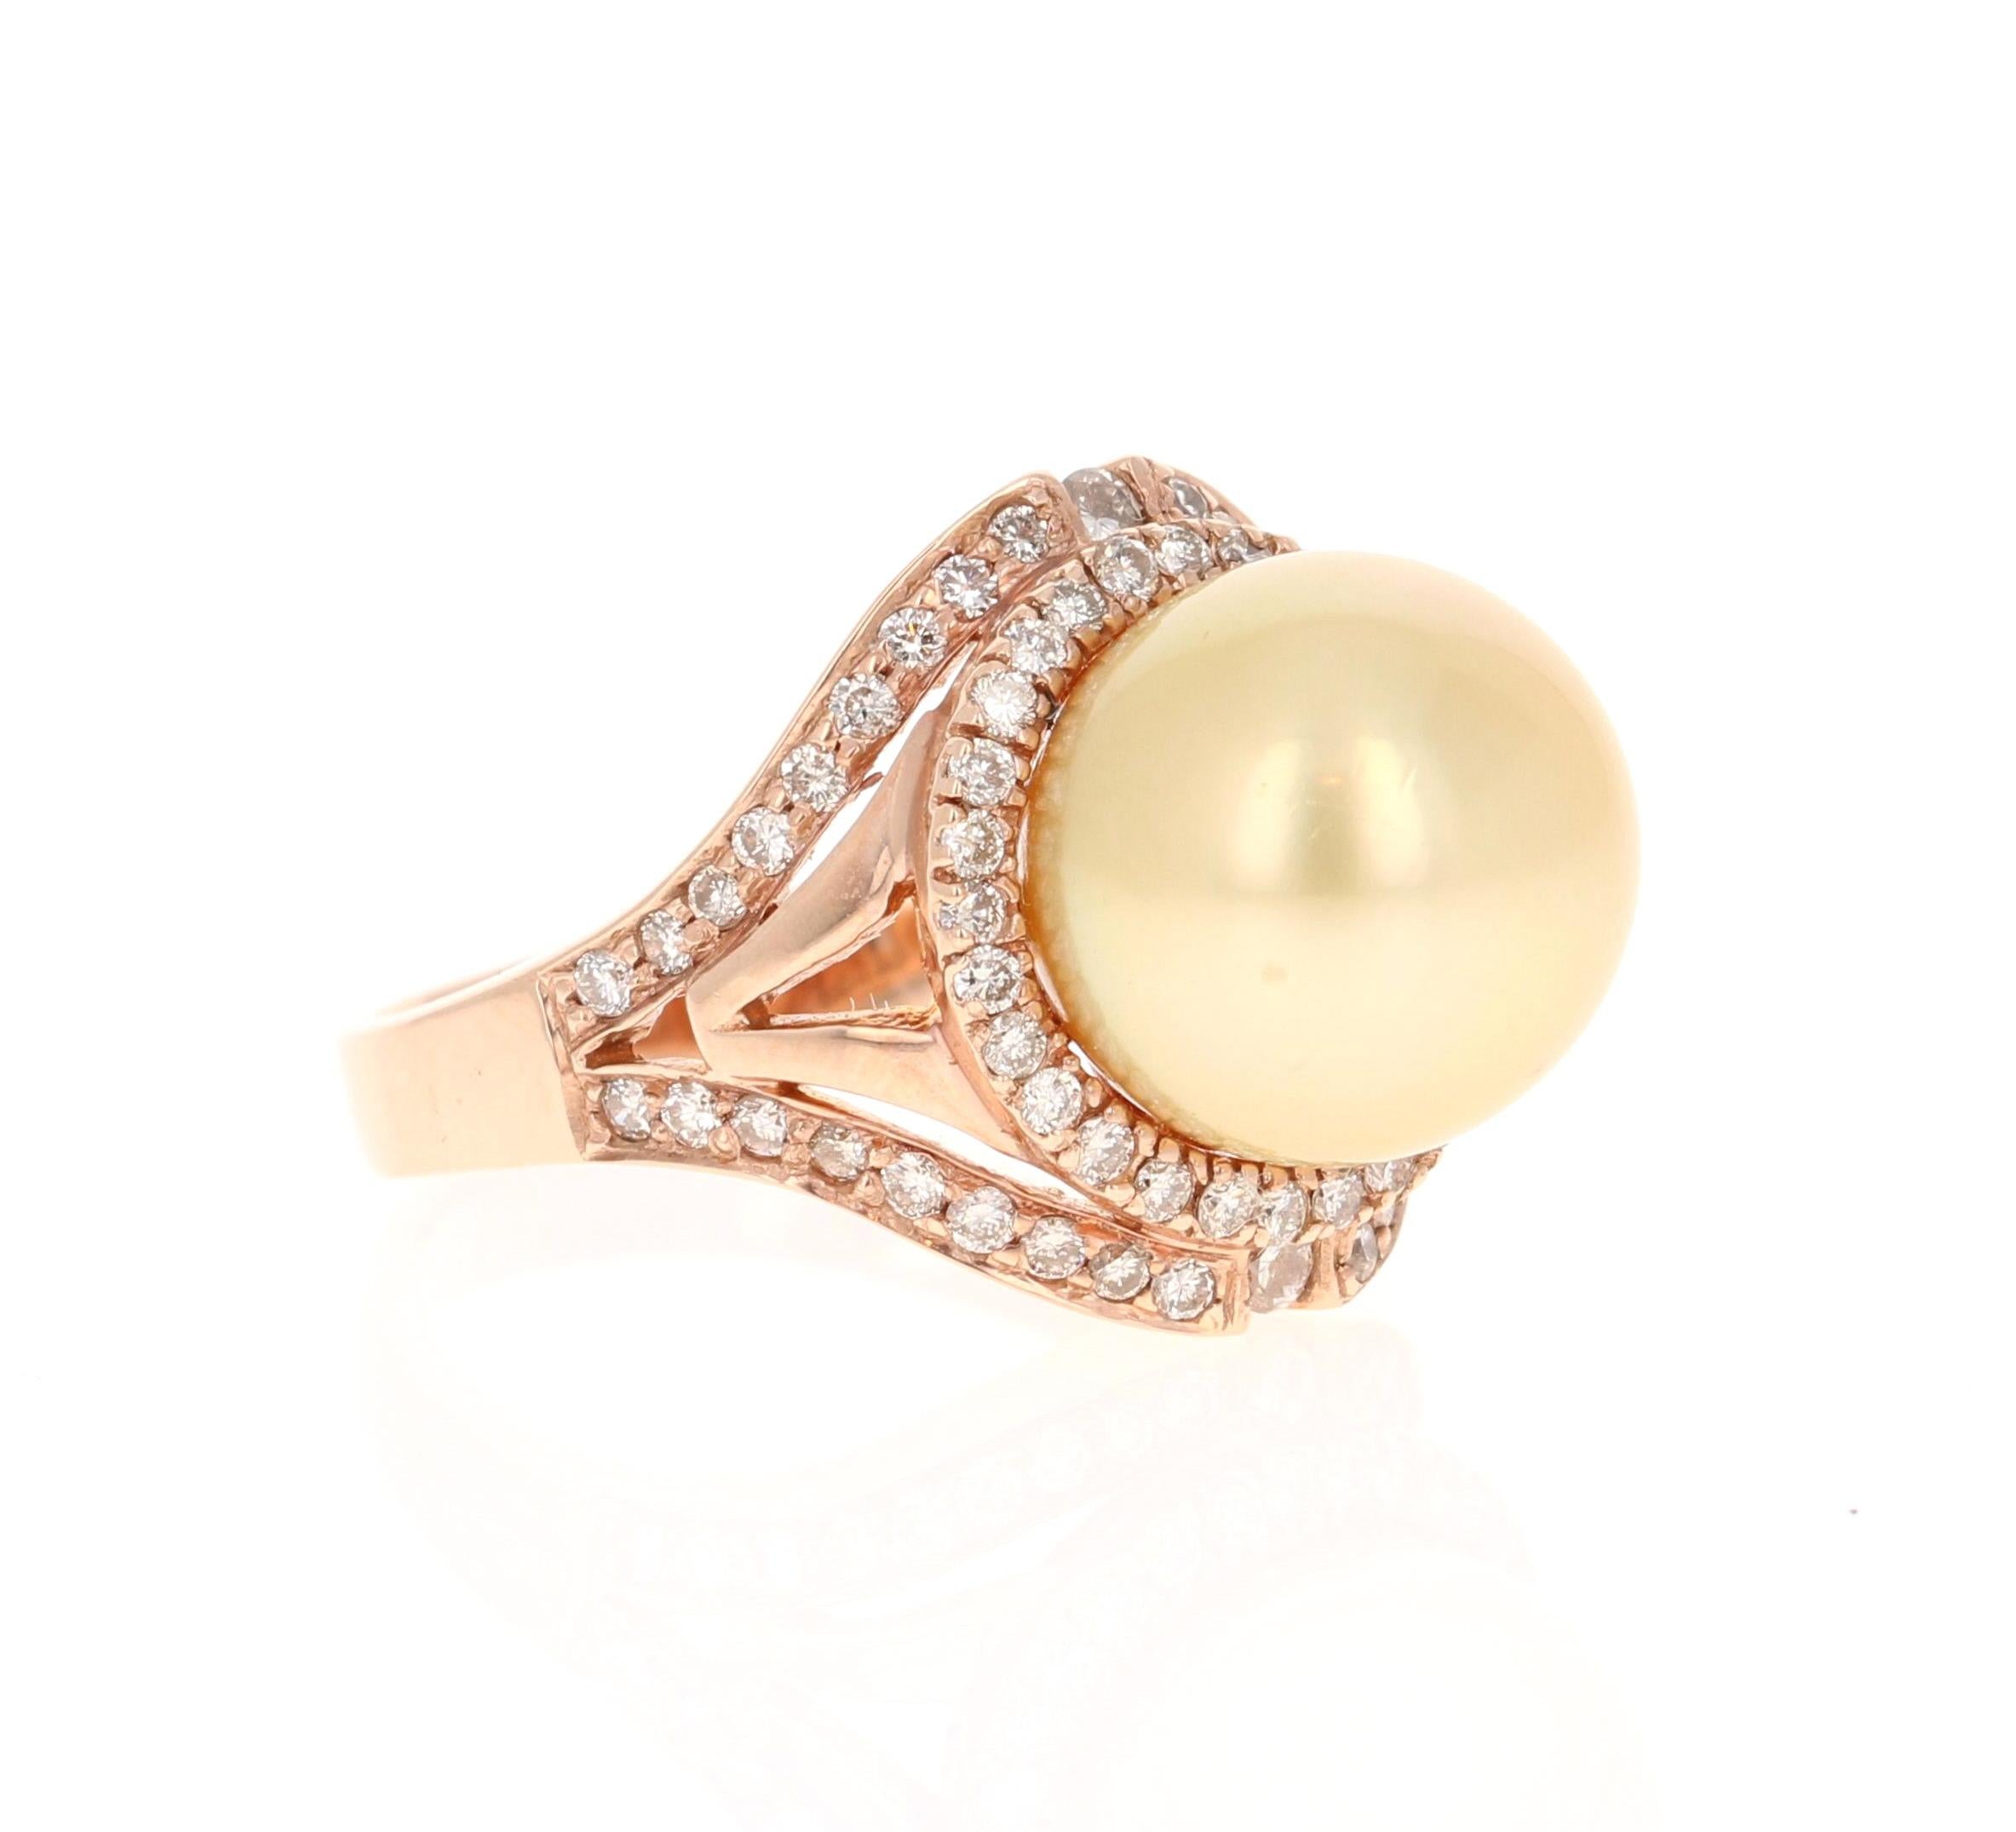 This beautiful South Sea Pearl Diamond ring has an 11.5 mm South Sea Golden Pearl and is surrounded by 66 Round Cut Diamonds that weigh 0.69 carats. (Clarity: VS, Color: F)

The gorgeous setting weighs approximately 6.9 grams. 
The ring size is 7